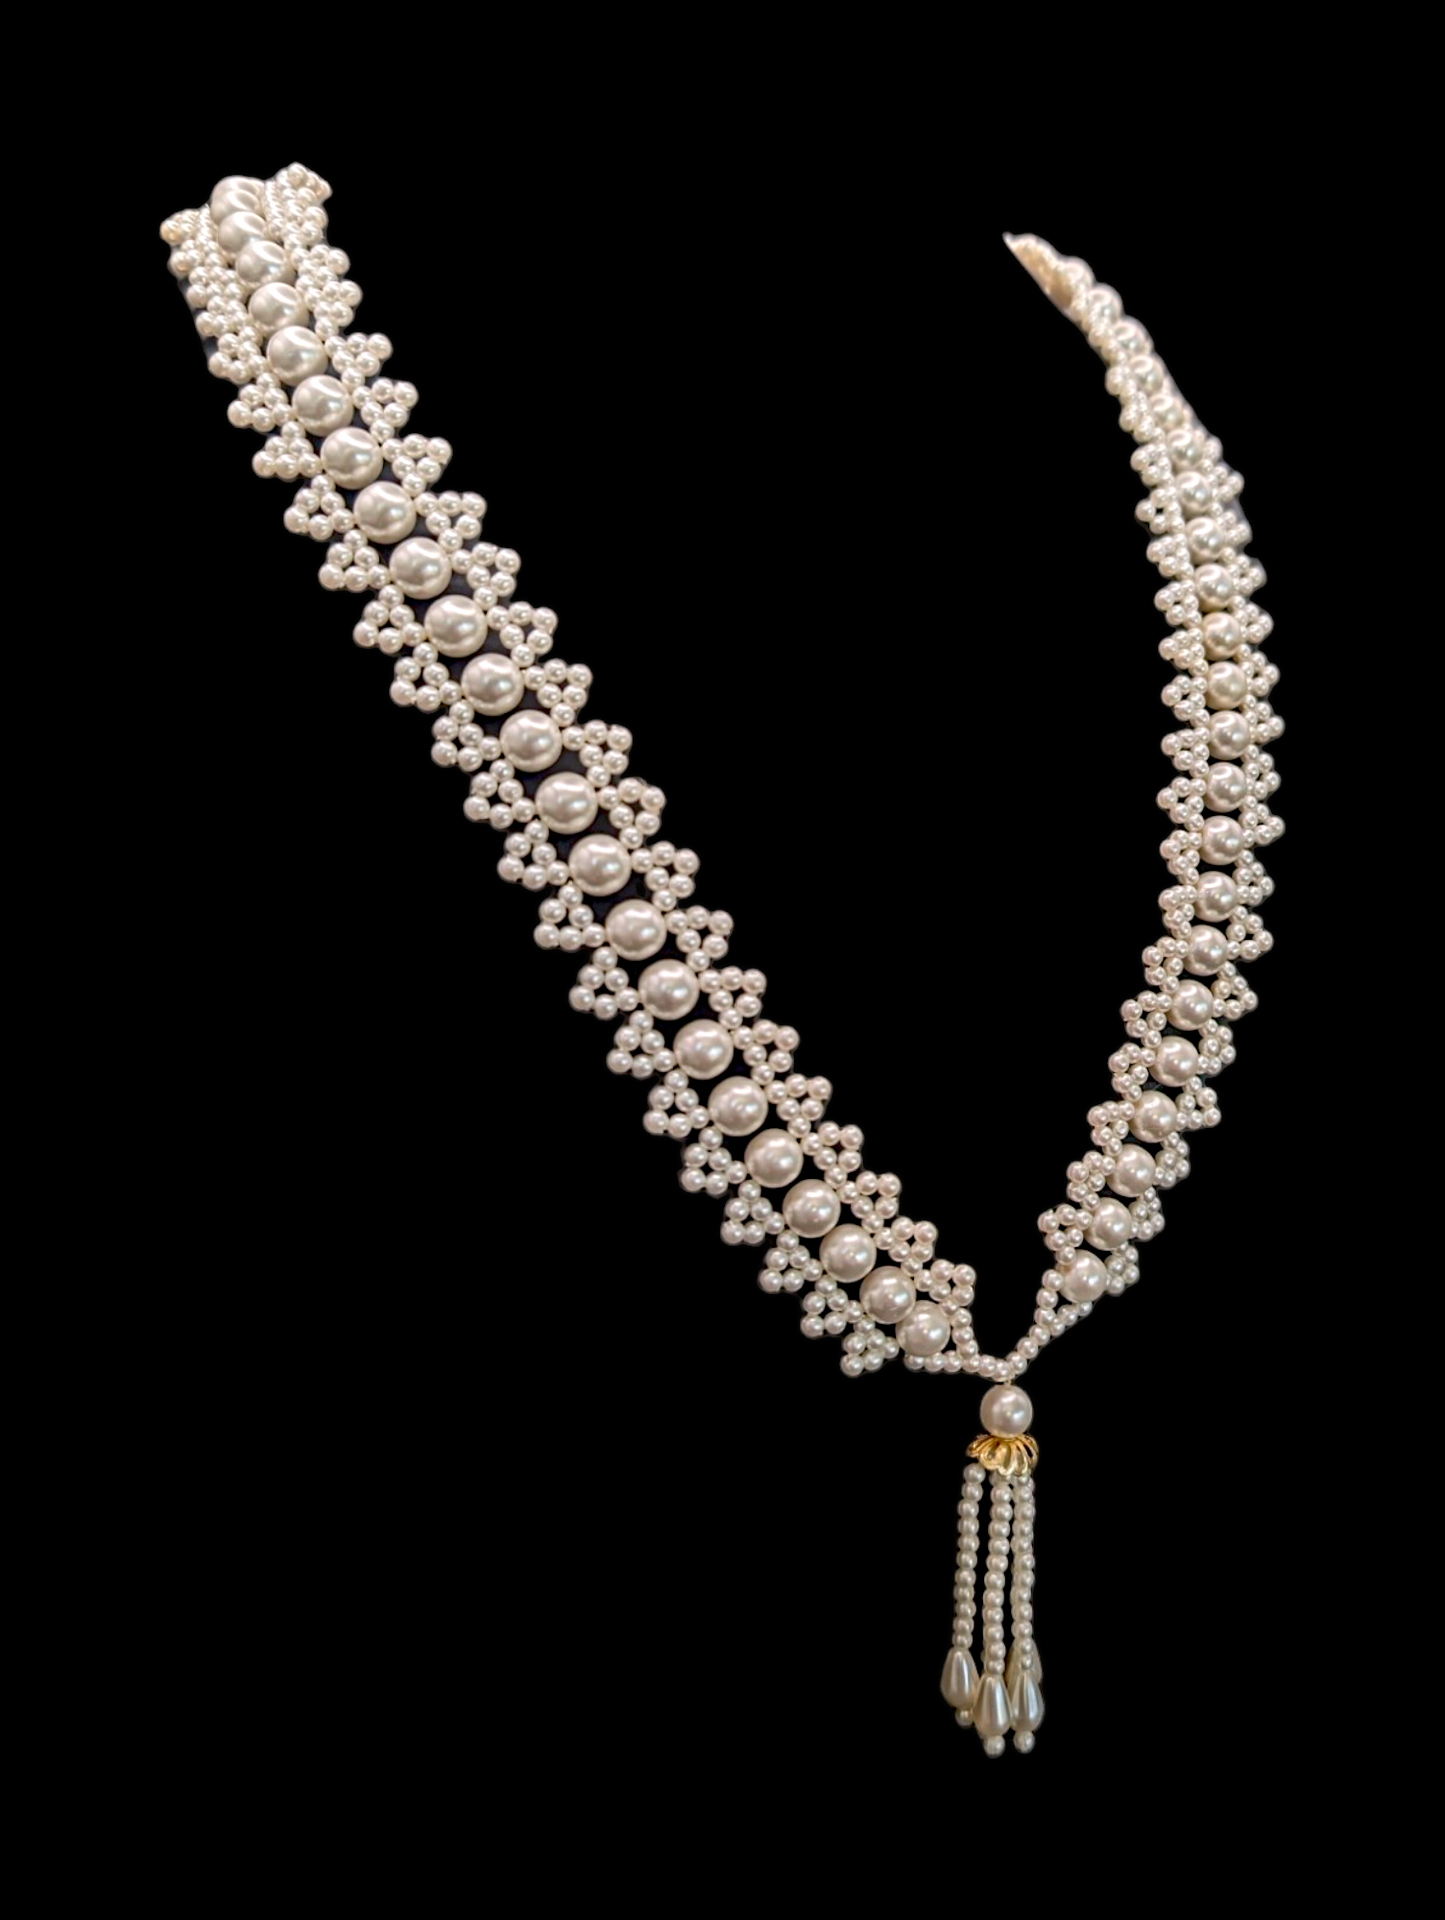 Vintage Intricate Art Deco Inspired Unique Pearl Necklace with Fringe Pendant